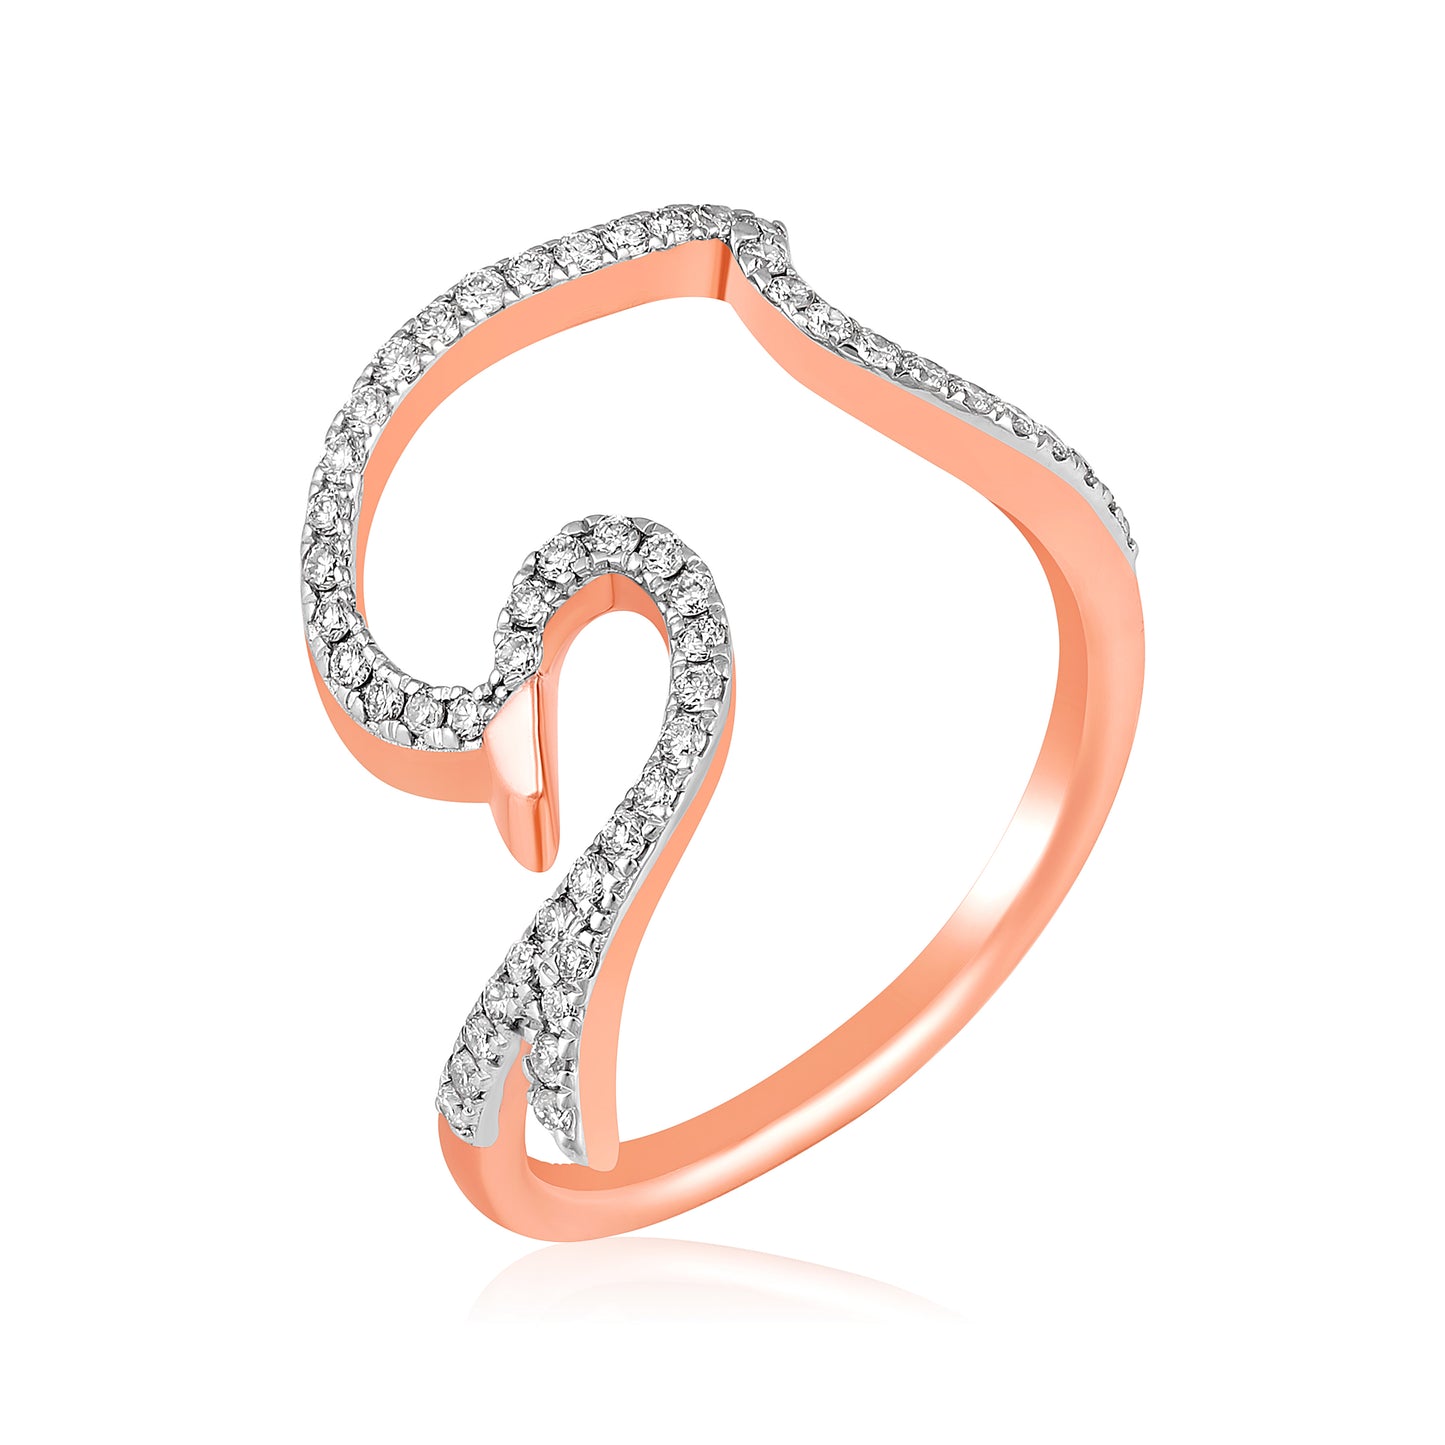 Dolphin Ring - Elegance in Motion